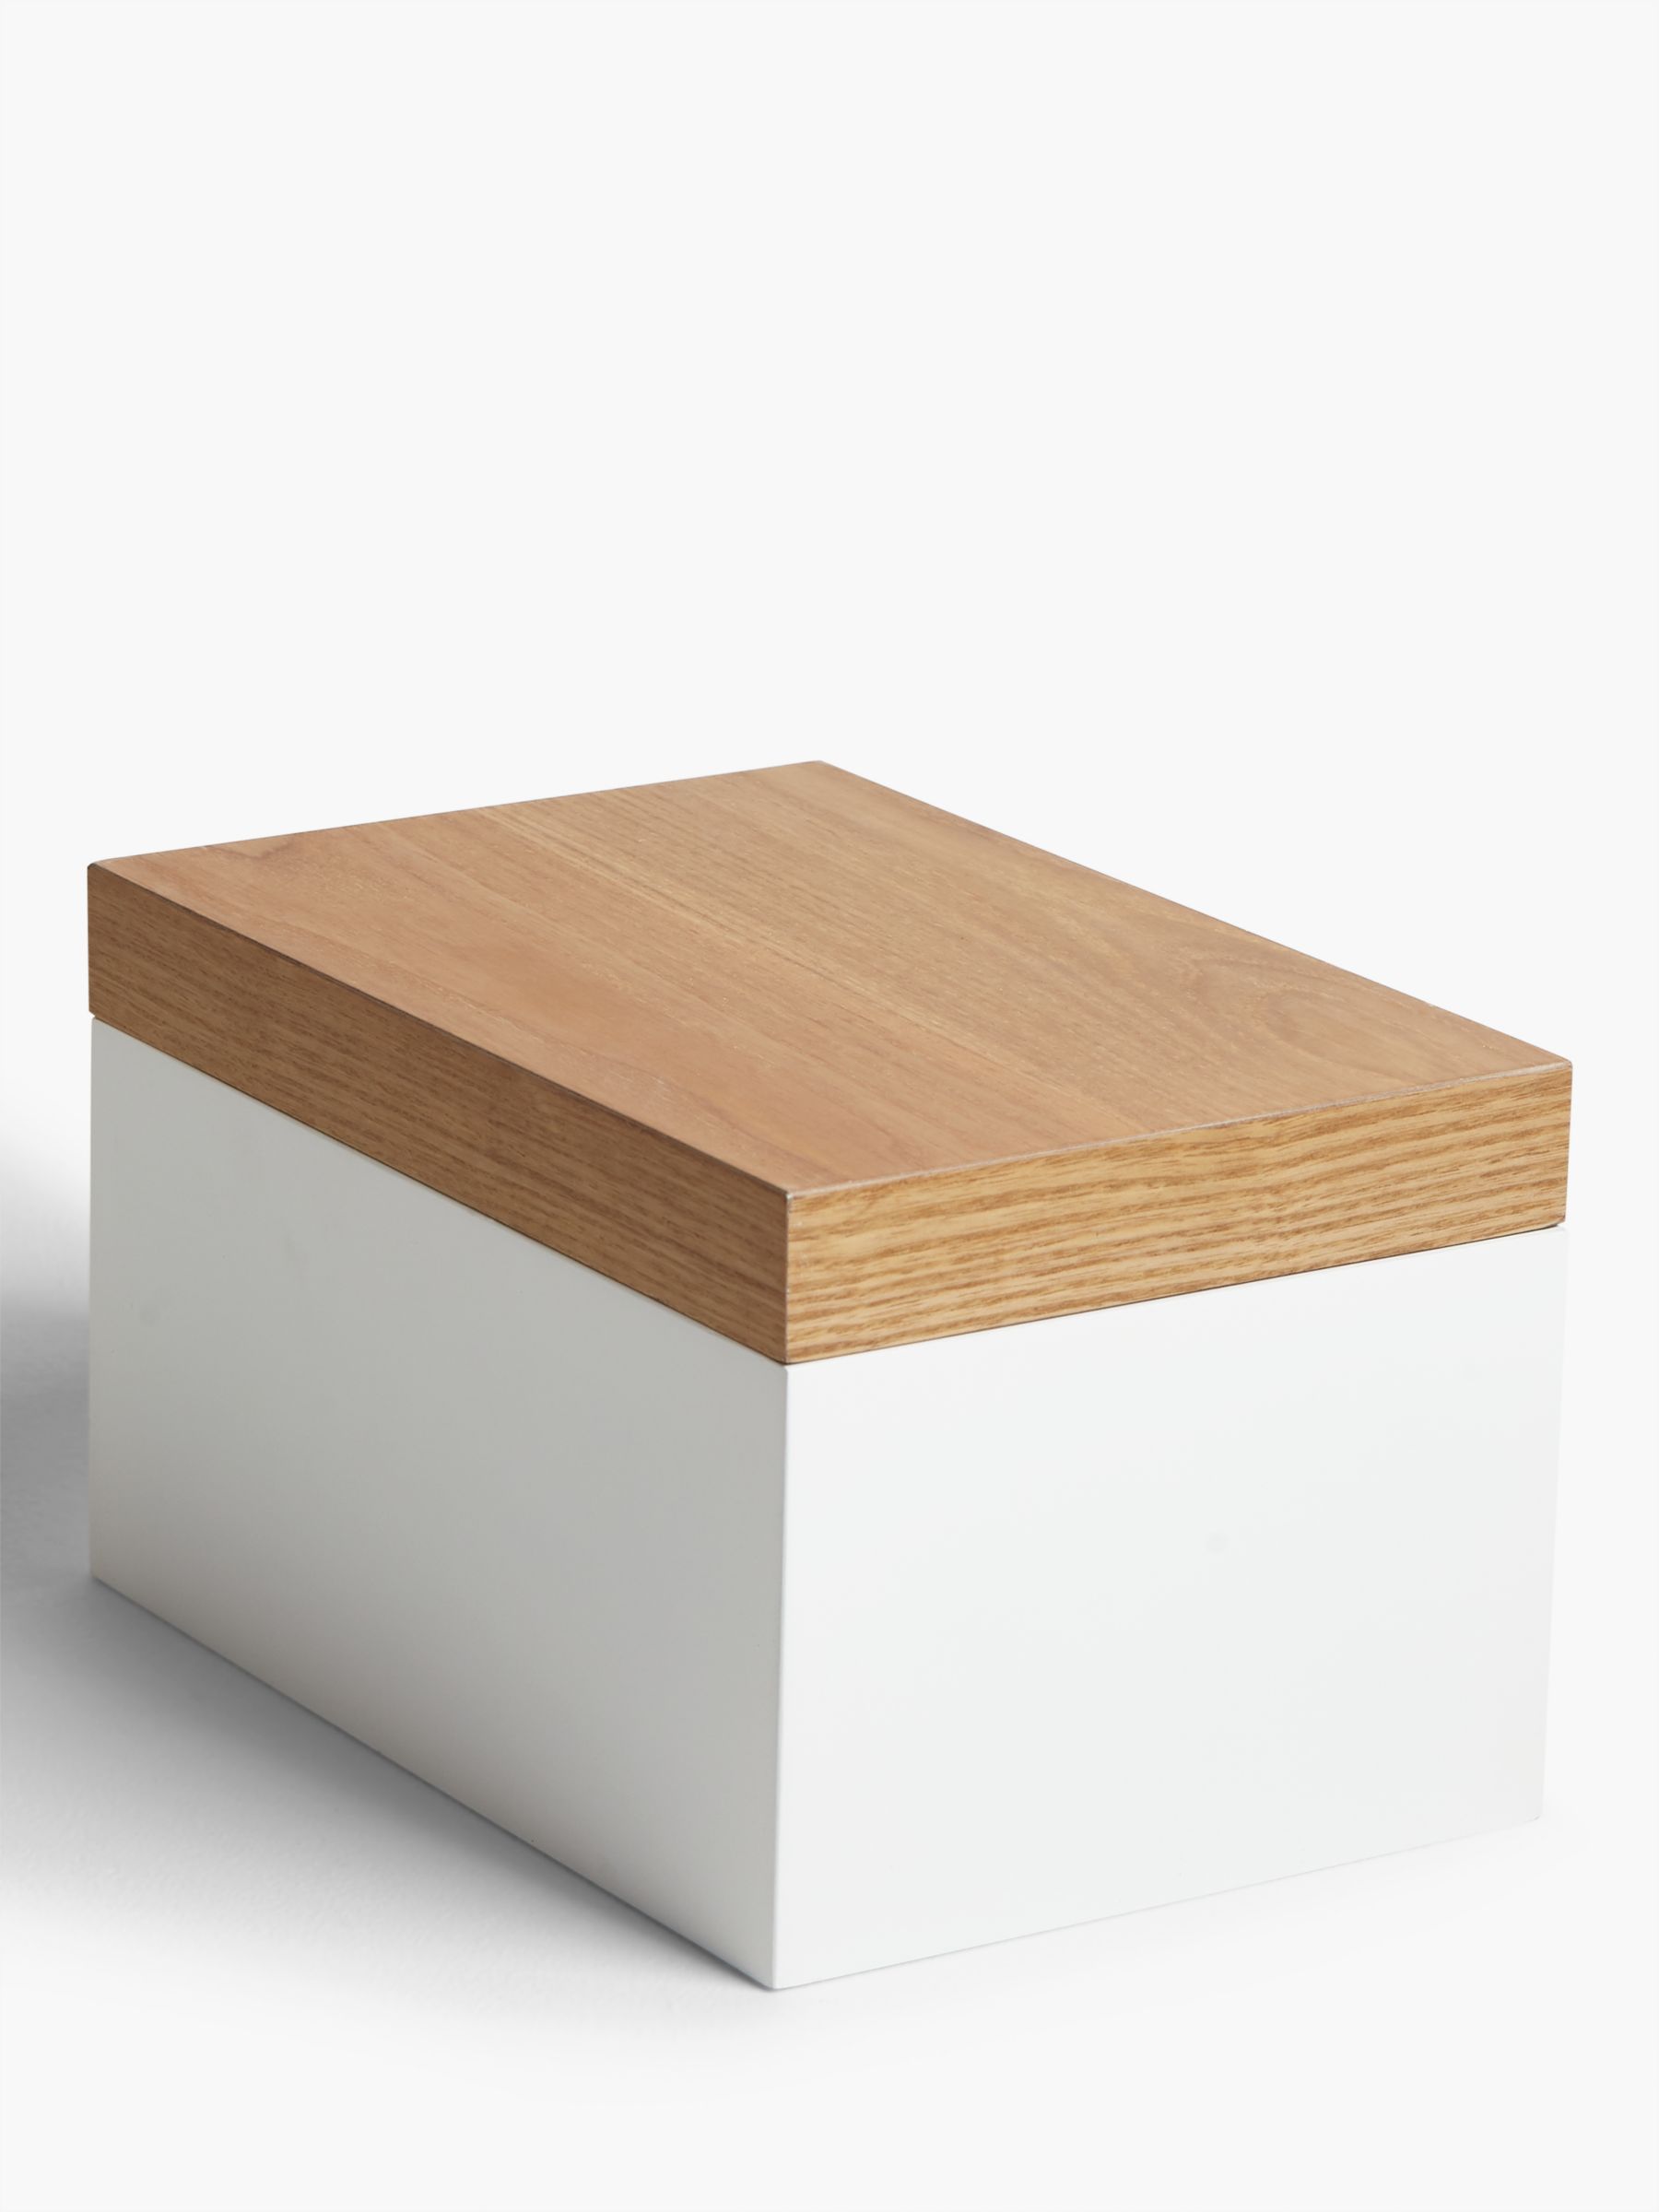 where to buy wooden boxes